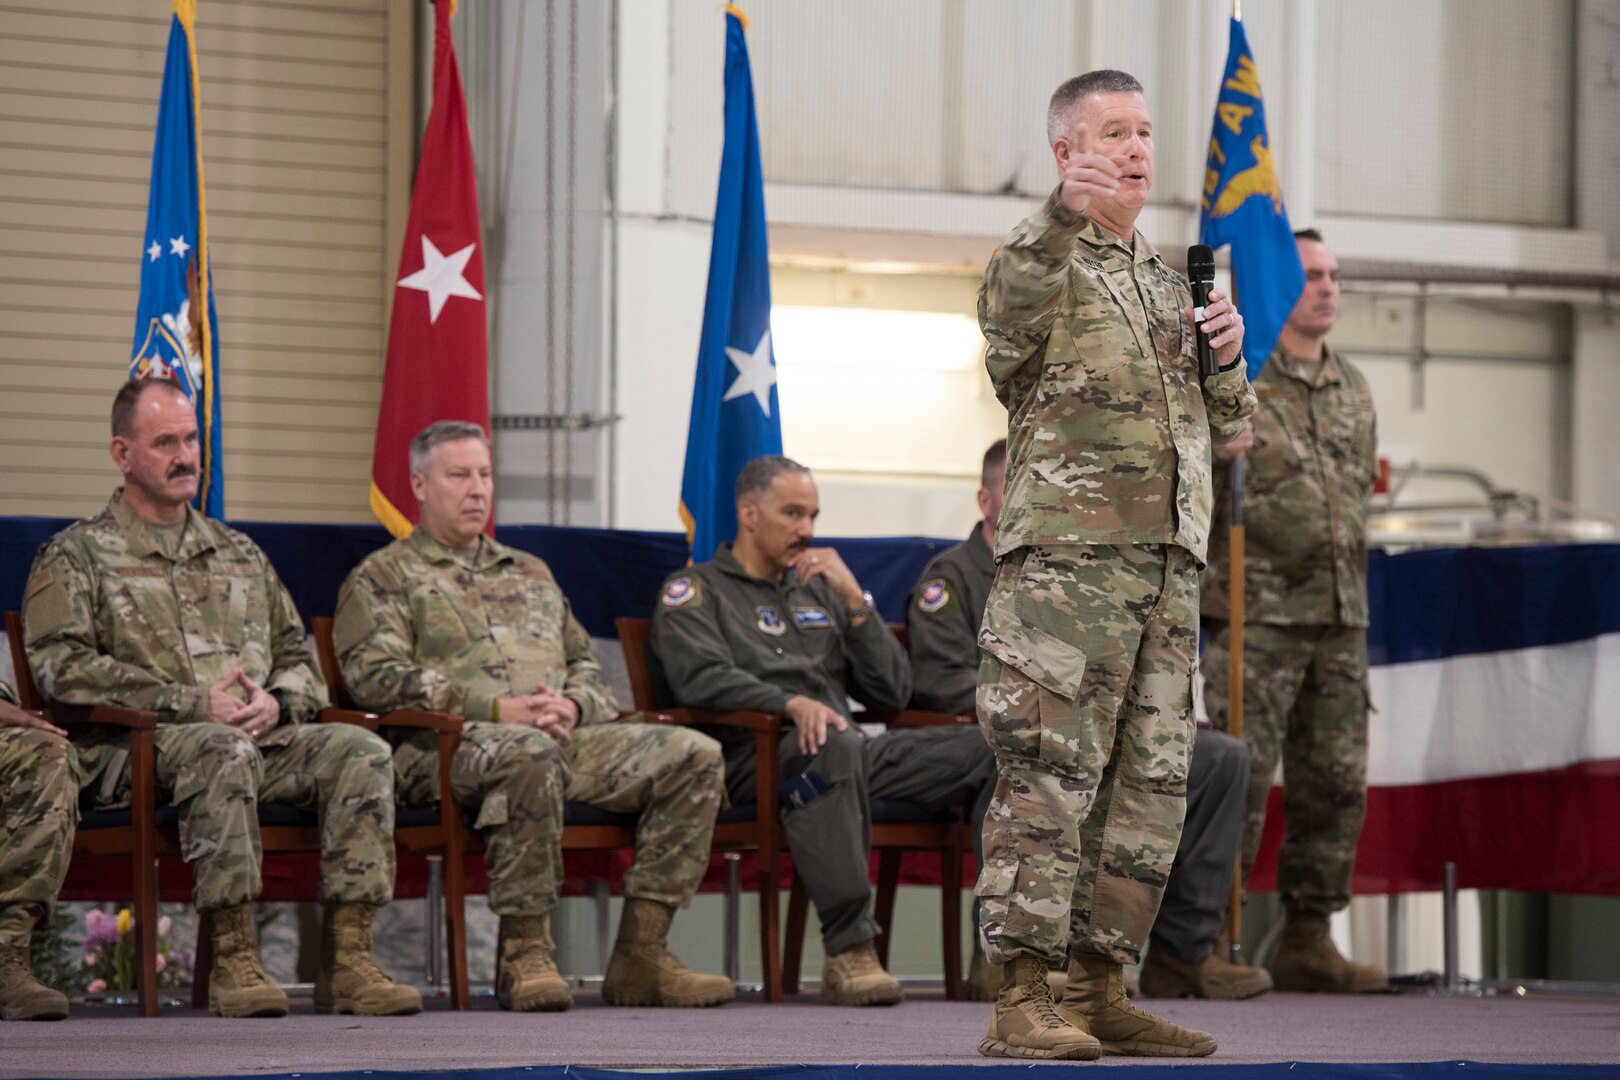 West Virginia National Guard Adjutant General, Maj. Gen. James Hoyer, talks about the great responsibility of being a wing commander during a change of command ceremony at the 167th Airlift Wing, West Virginia Air National Guard, Jan. 12, 2020. Col. Martin Timko assumed command of the wing, Col. David Cochran relinquished command during the ceremony.